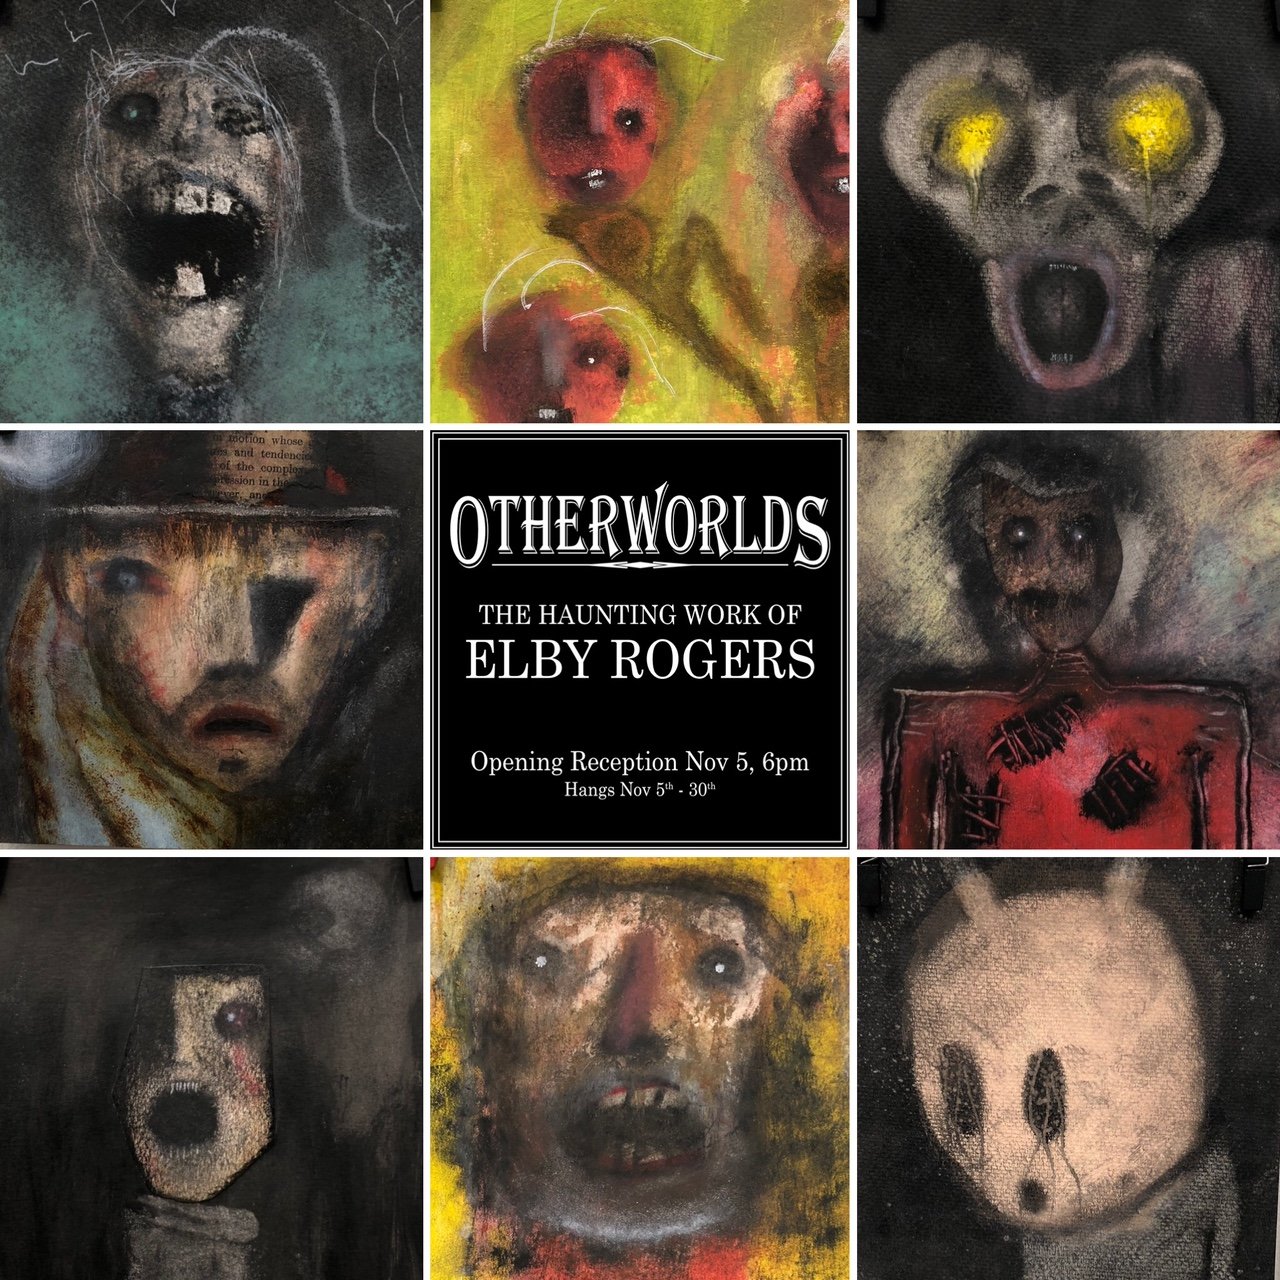  Our featured artist for November is Elby Rogers, an outsider artist whose work evokes a wide range of emotional responses. 